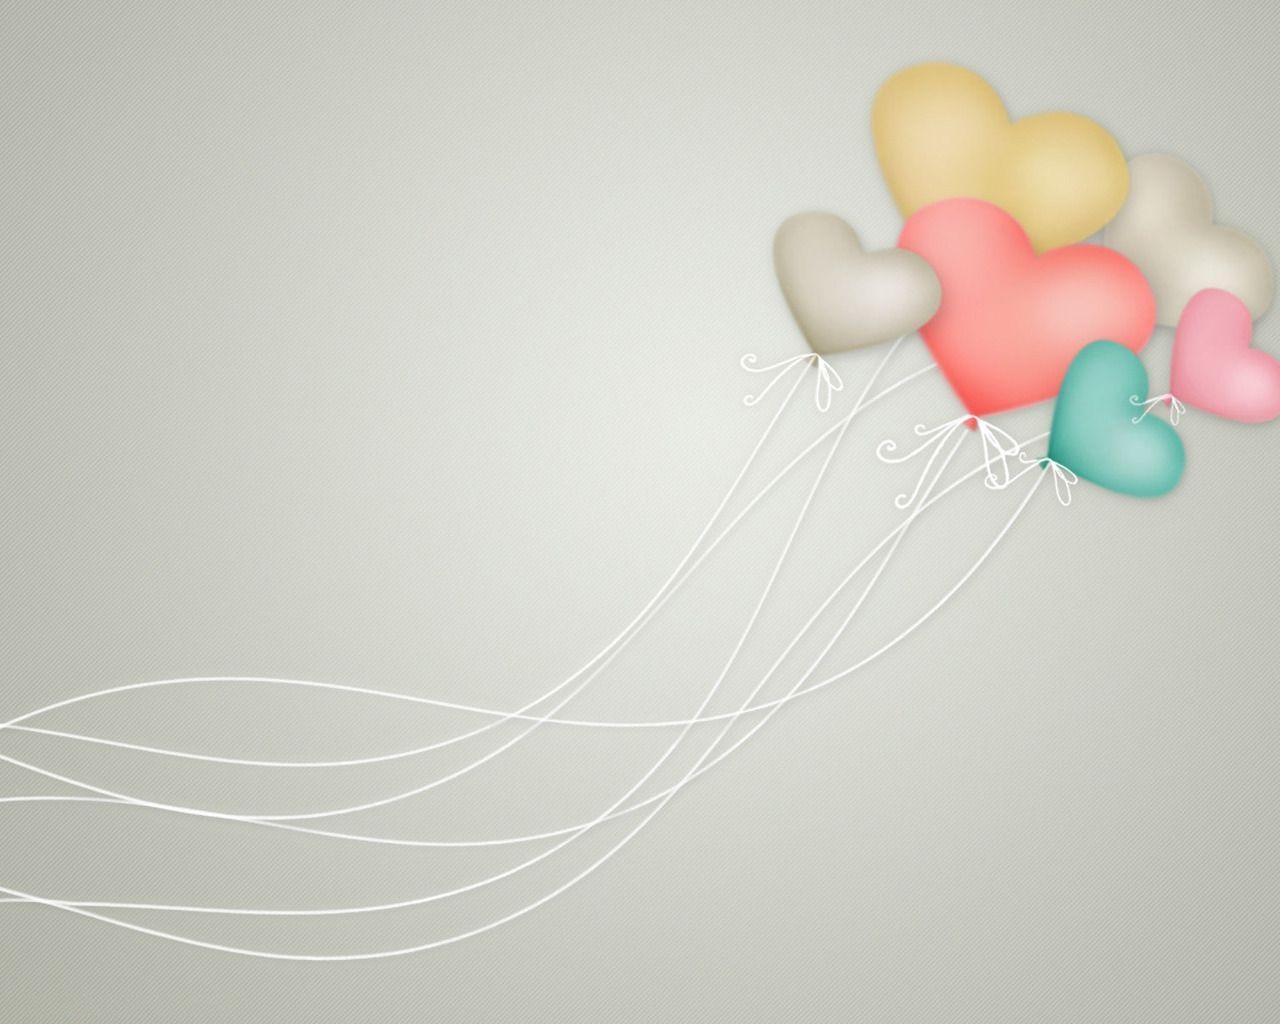 Balloons Heart of Love PPT Backgrounds